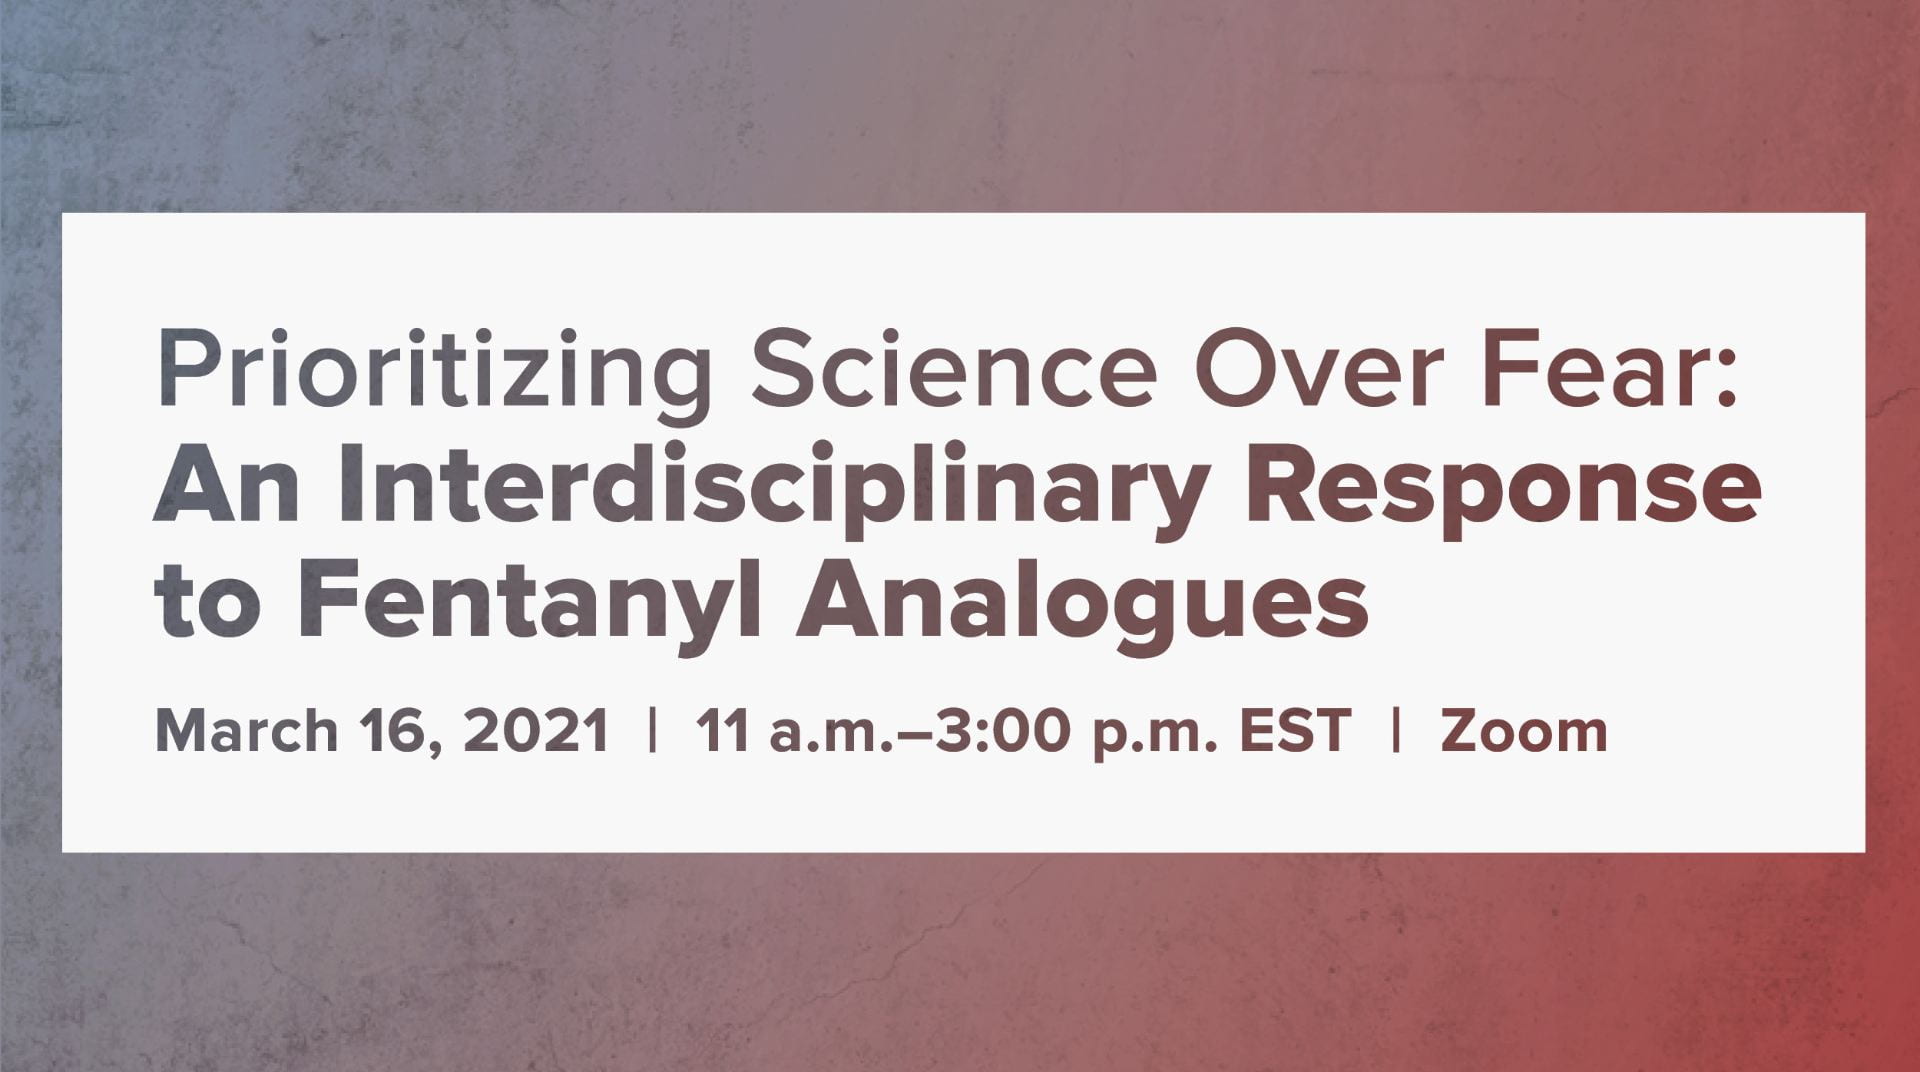 Prioritizing Science Over Fear: An Interdisciplinary Response to Fentanyl Analogues. March 16, 2021, 11 a.m.-3:00 p.m., Zoom